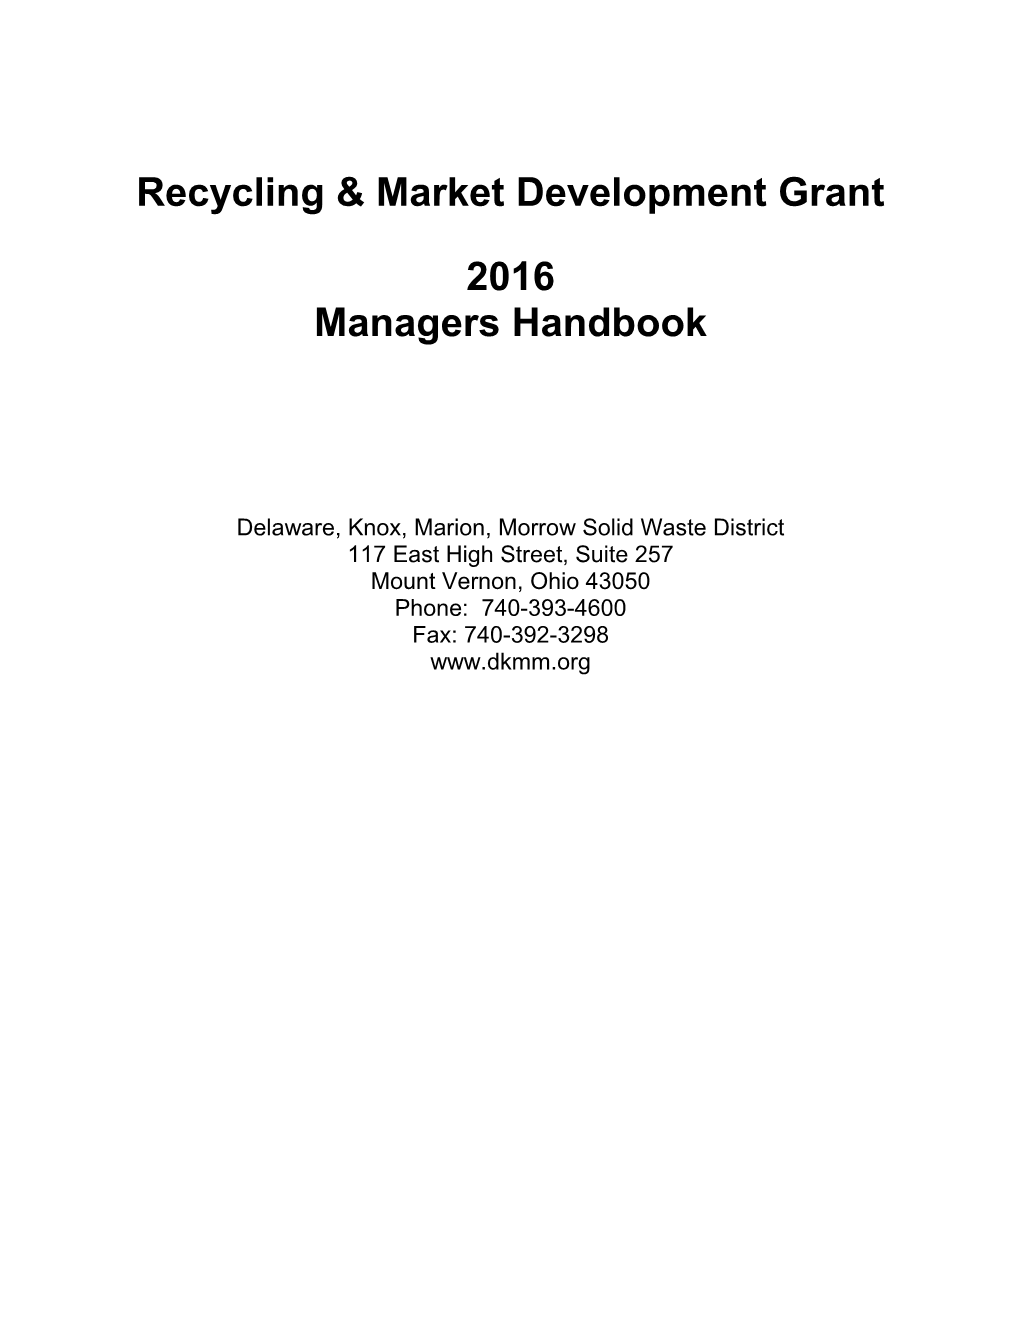 2006 CD/MDG Managers Manual